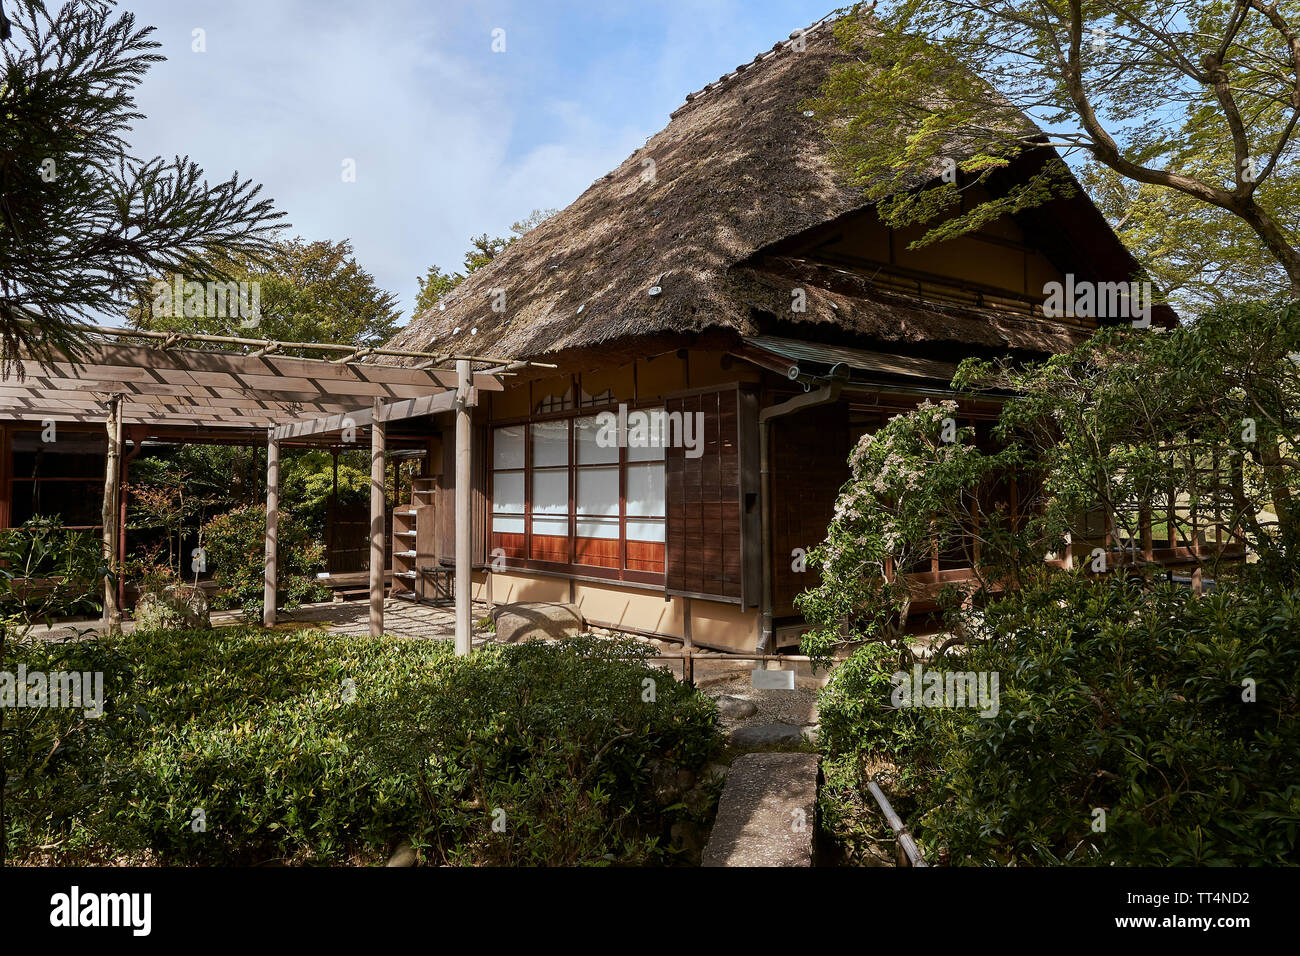 A traditional japanese wooden house, covered with straw. Trees and bushes belong to the park around the house. Stock Photo